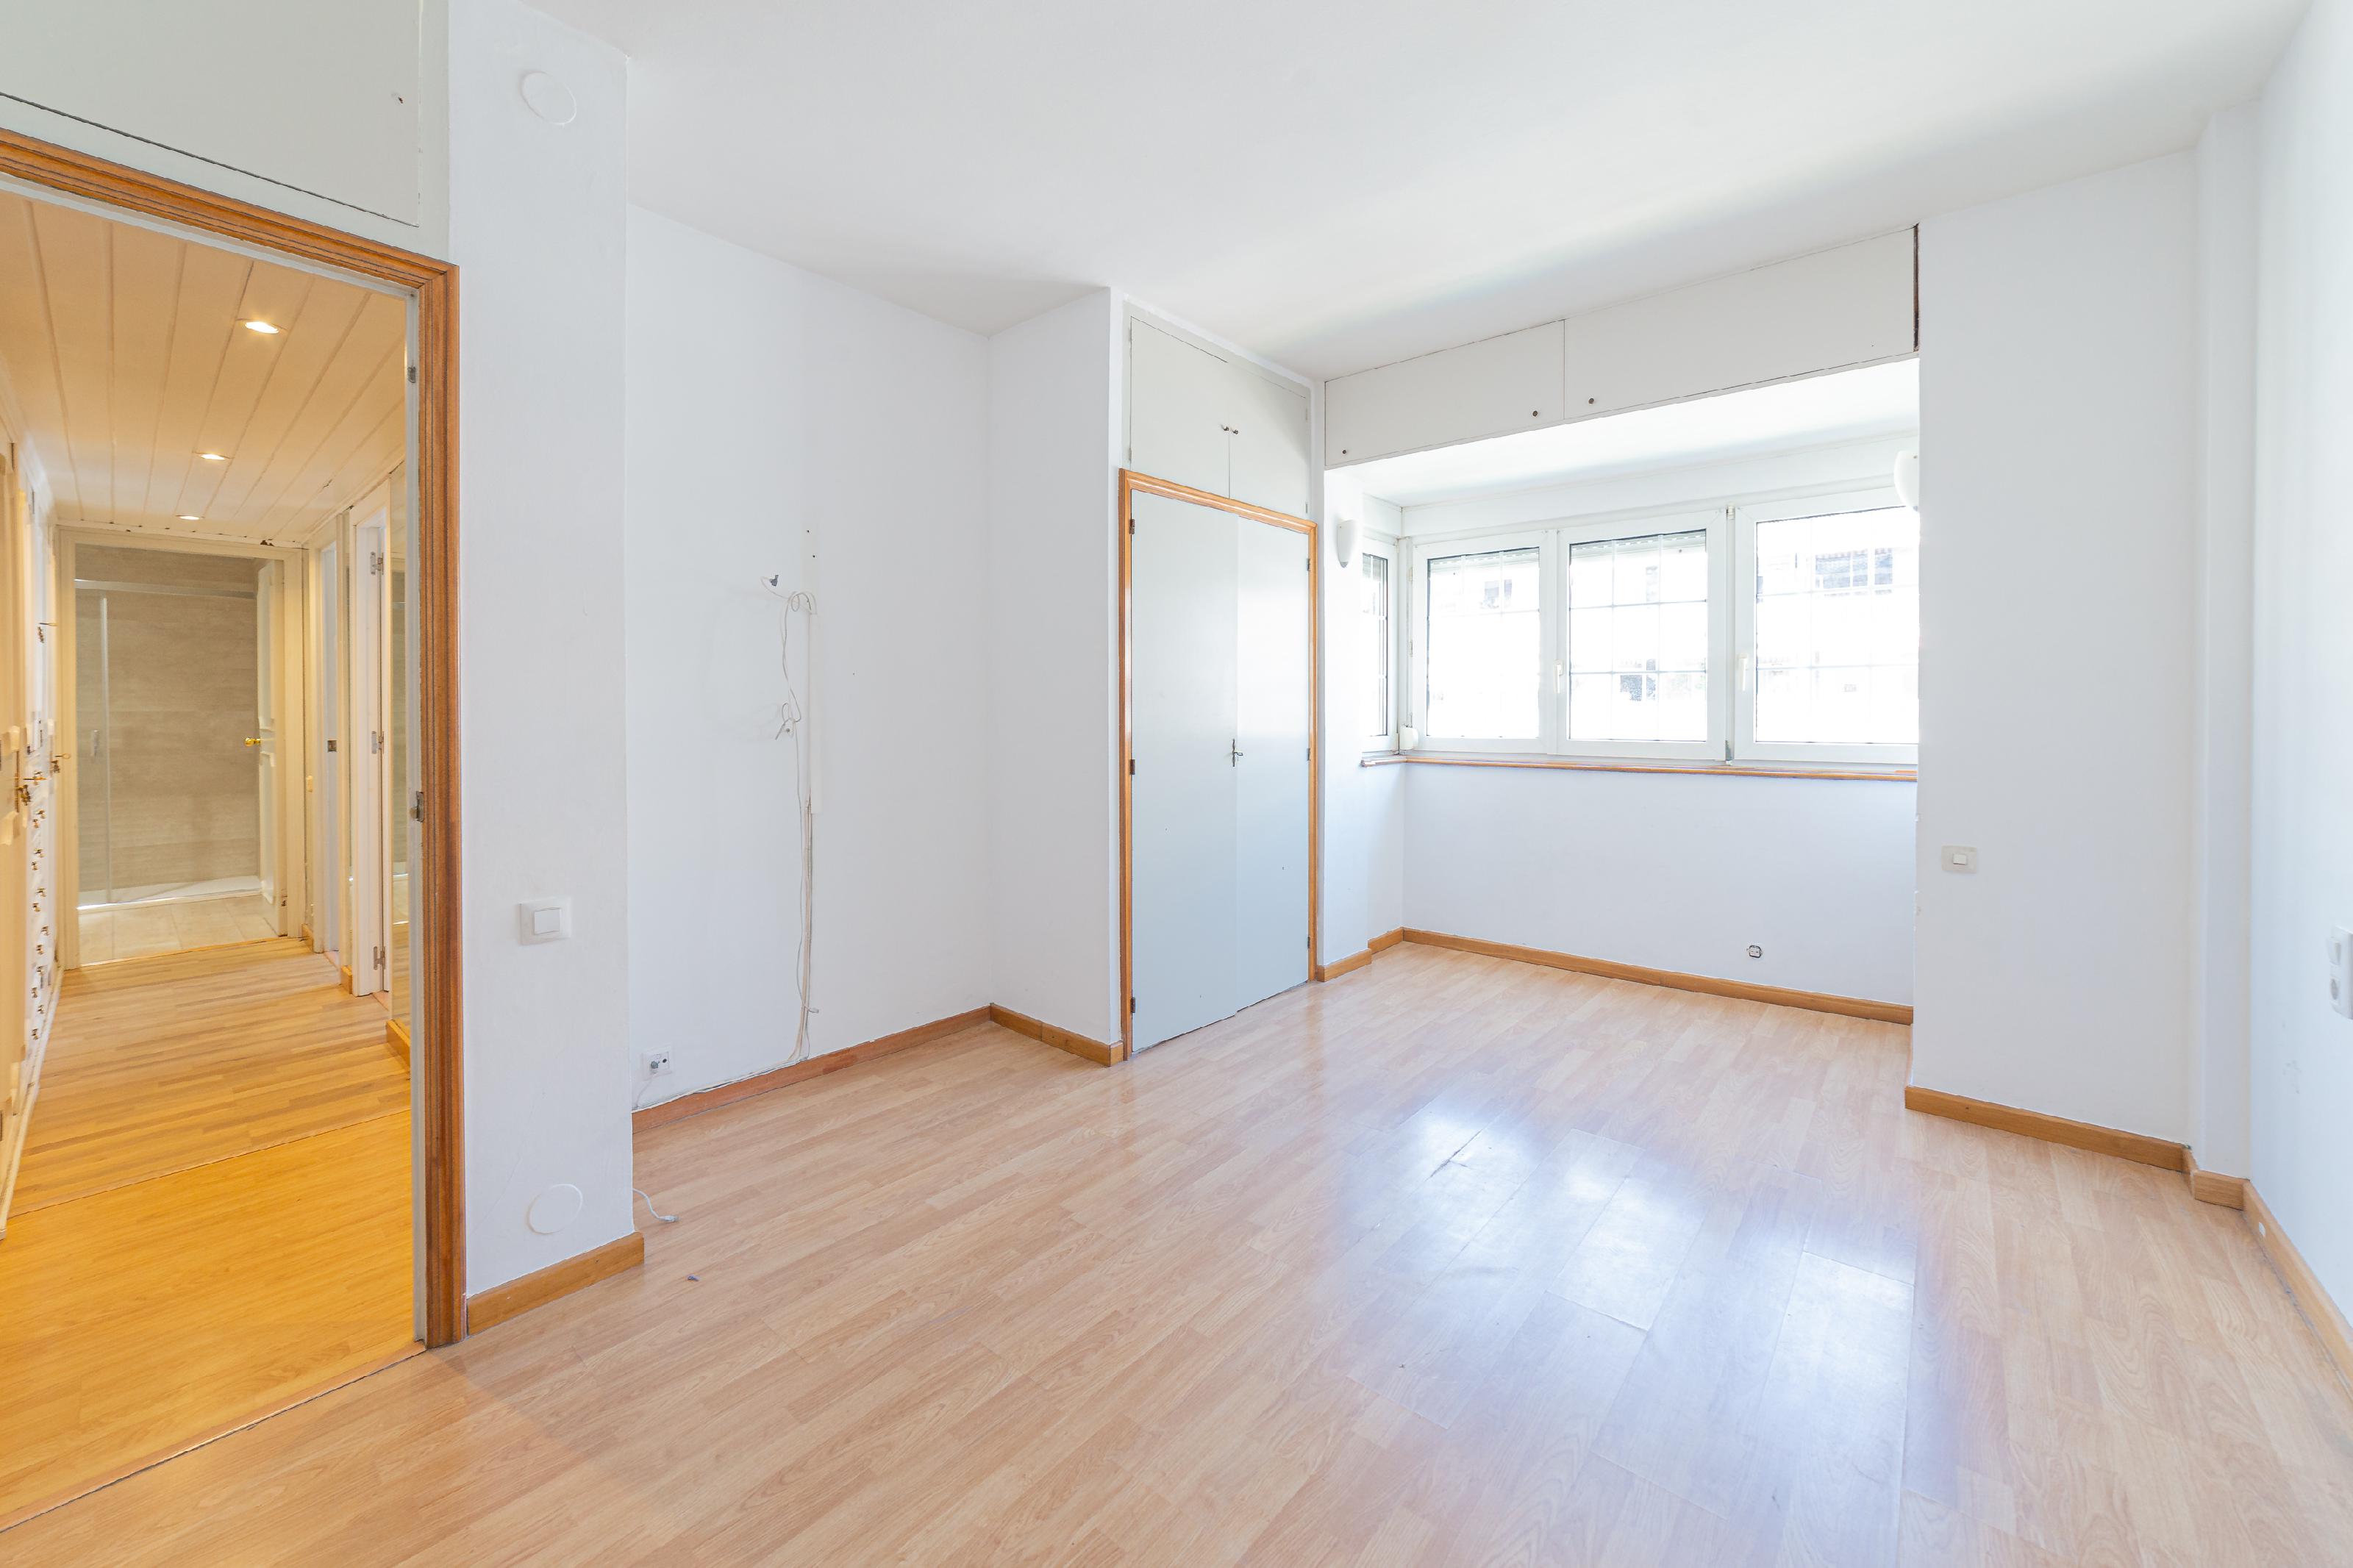 272927 Flat for sale in Les Corts, Pedralbes 5